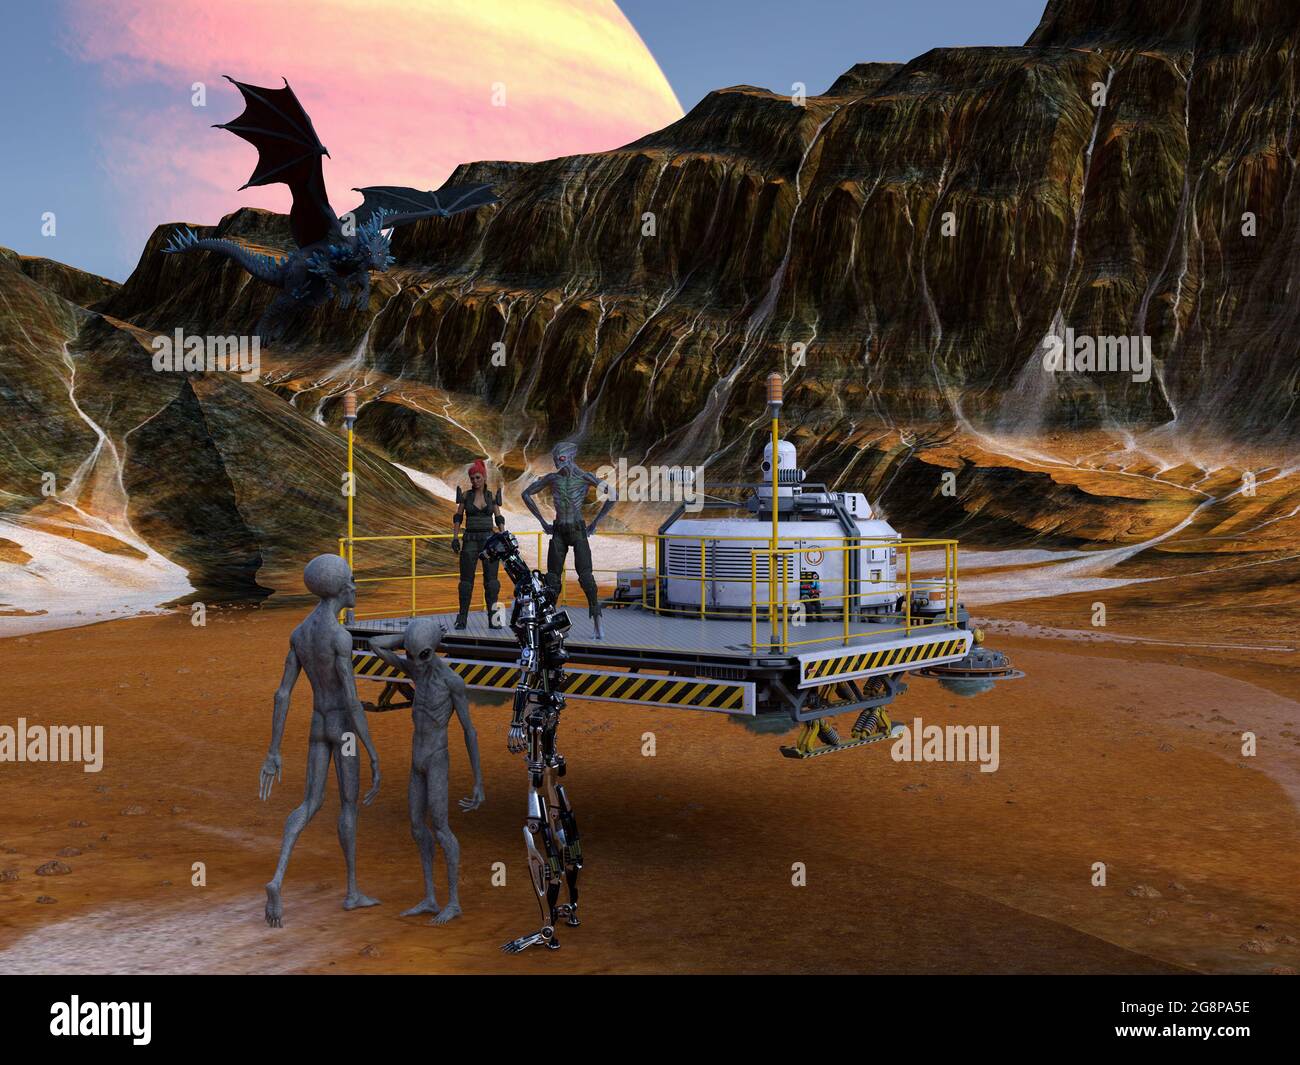 3d illustration of an extraterrestrial standing and a woman standing on a mining platform talking to two gray aliens and a large robot plus a flying d Stock Photo